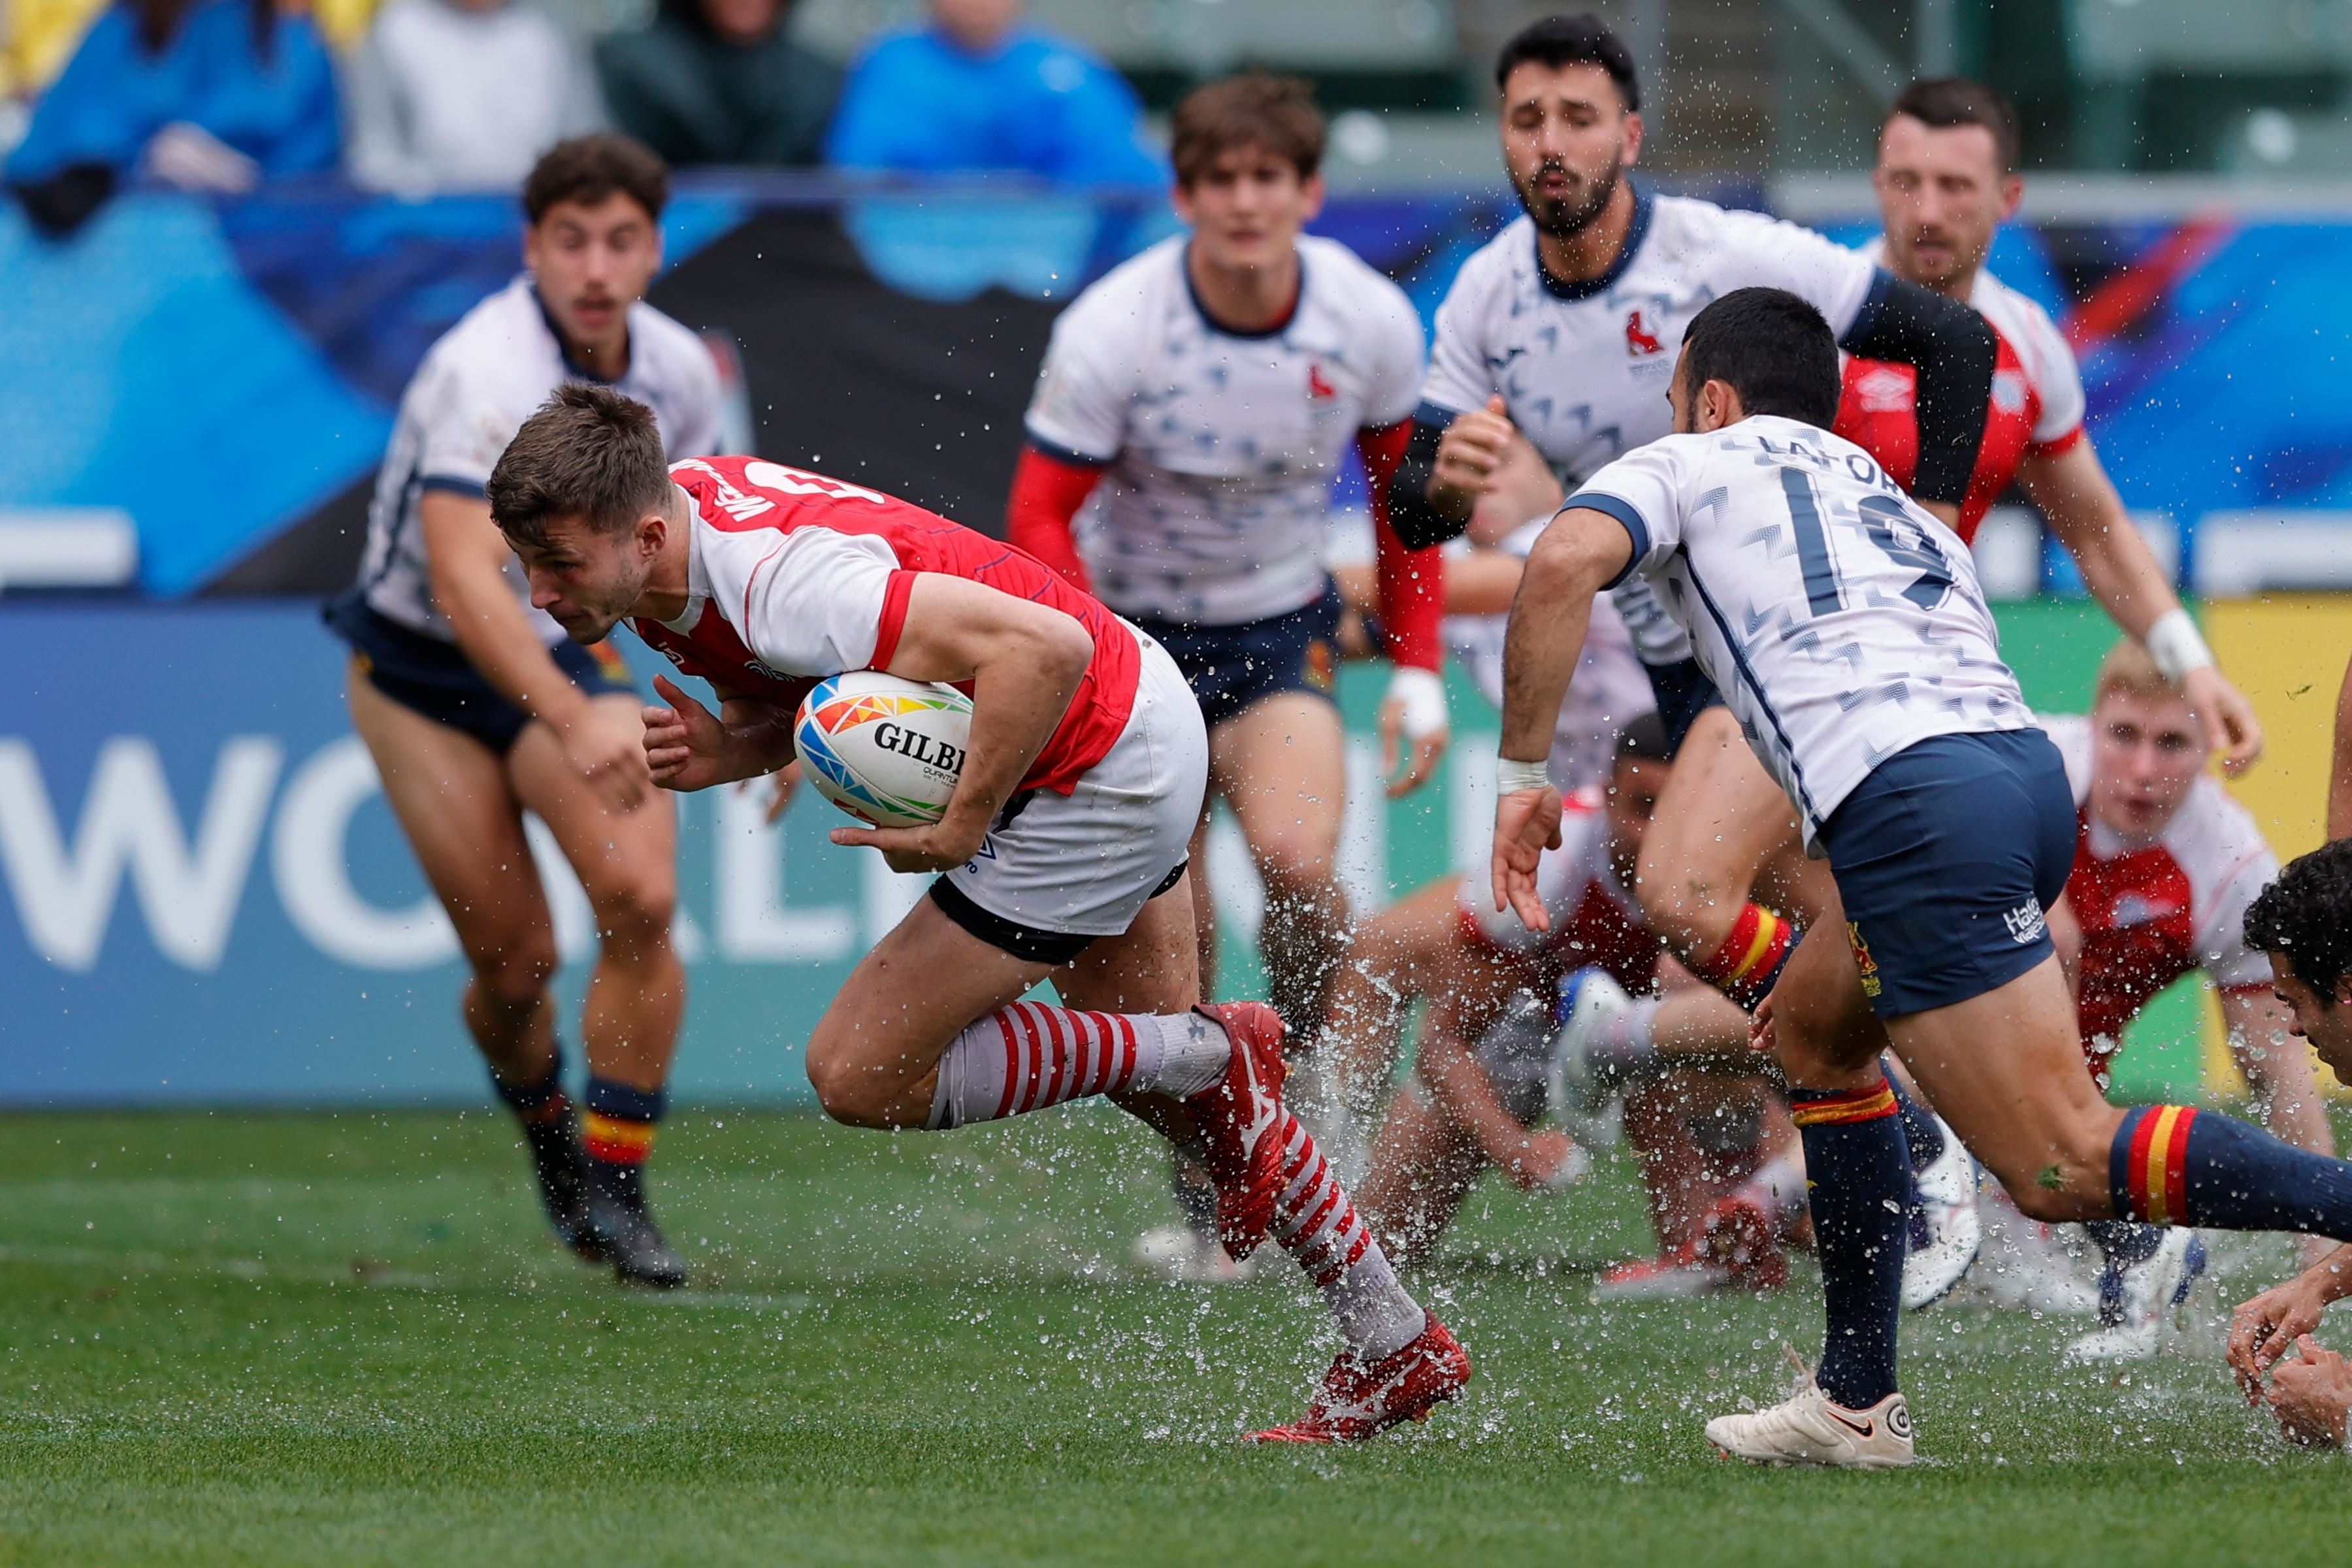 USA 7s vs Spain 7s Prediction, Betting Tips & Odds │31 MARCH, 2023